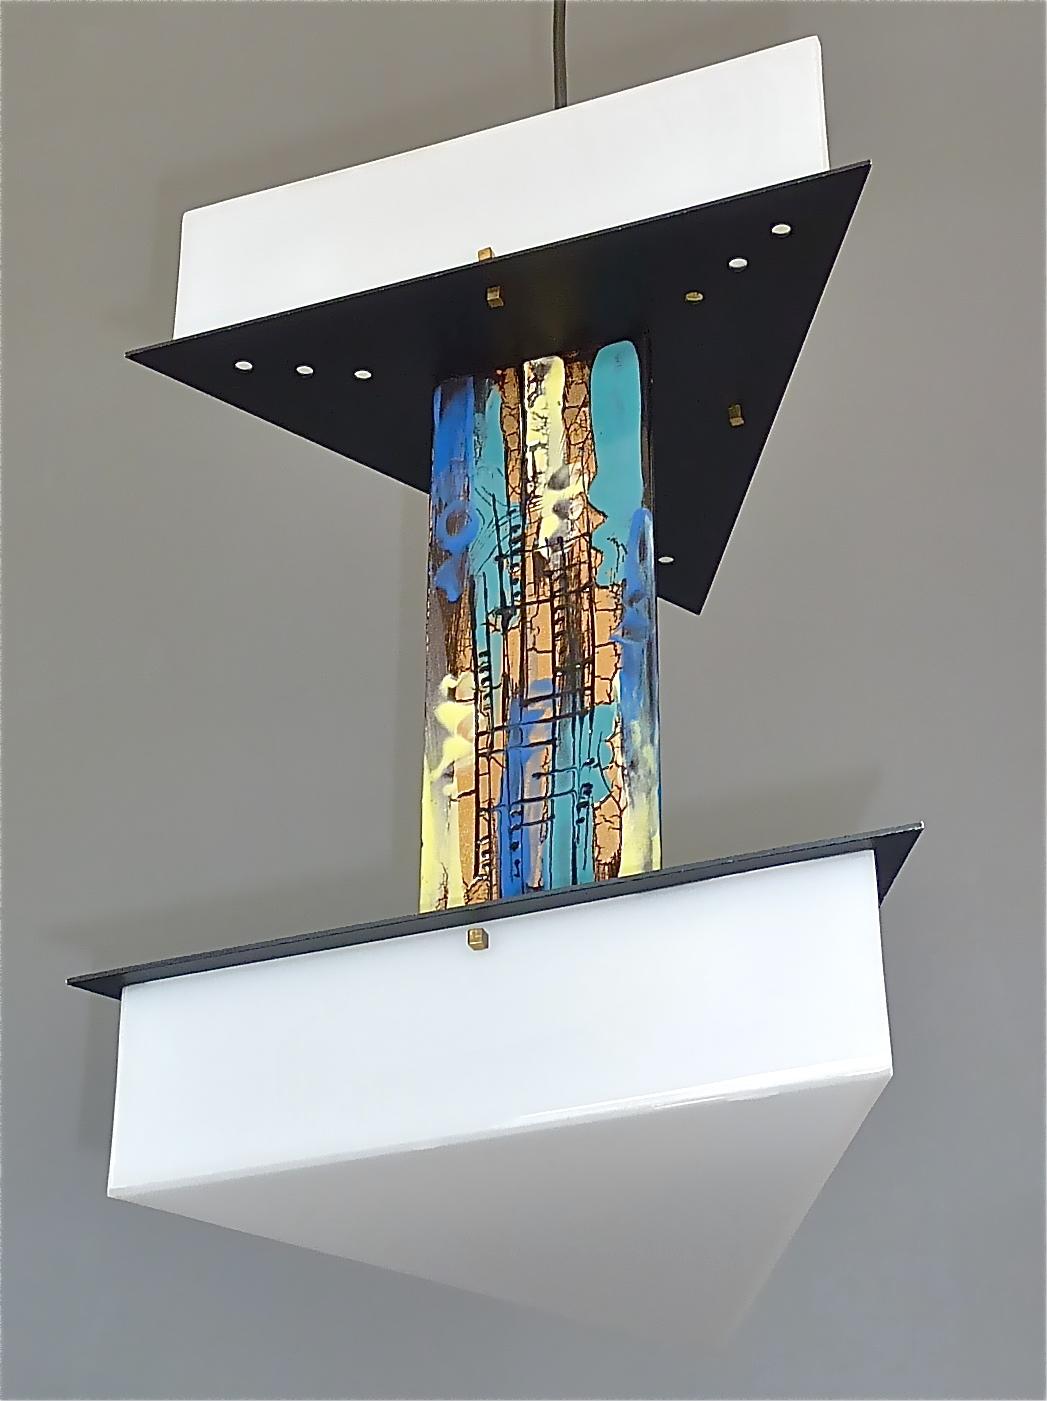 This is No 1 of 2 available. 
Rare signed Italian Mid-century chandelier by Angelo Brotto for Esperia, Poggibonsi, Italy around 1950s to 1960s. The stunning triangle double-decker chandelier is made of white perspex or acrylic, black plastic, cool